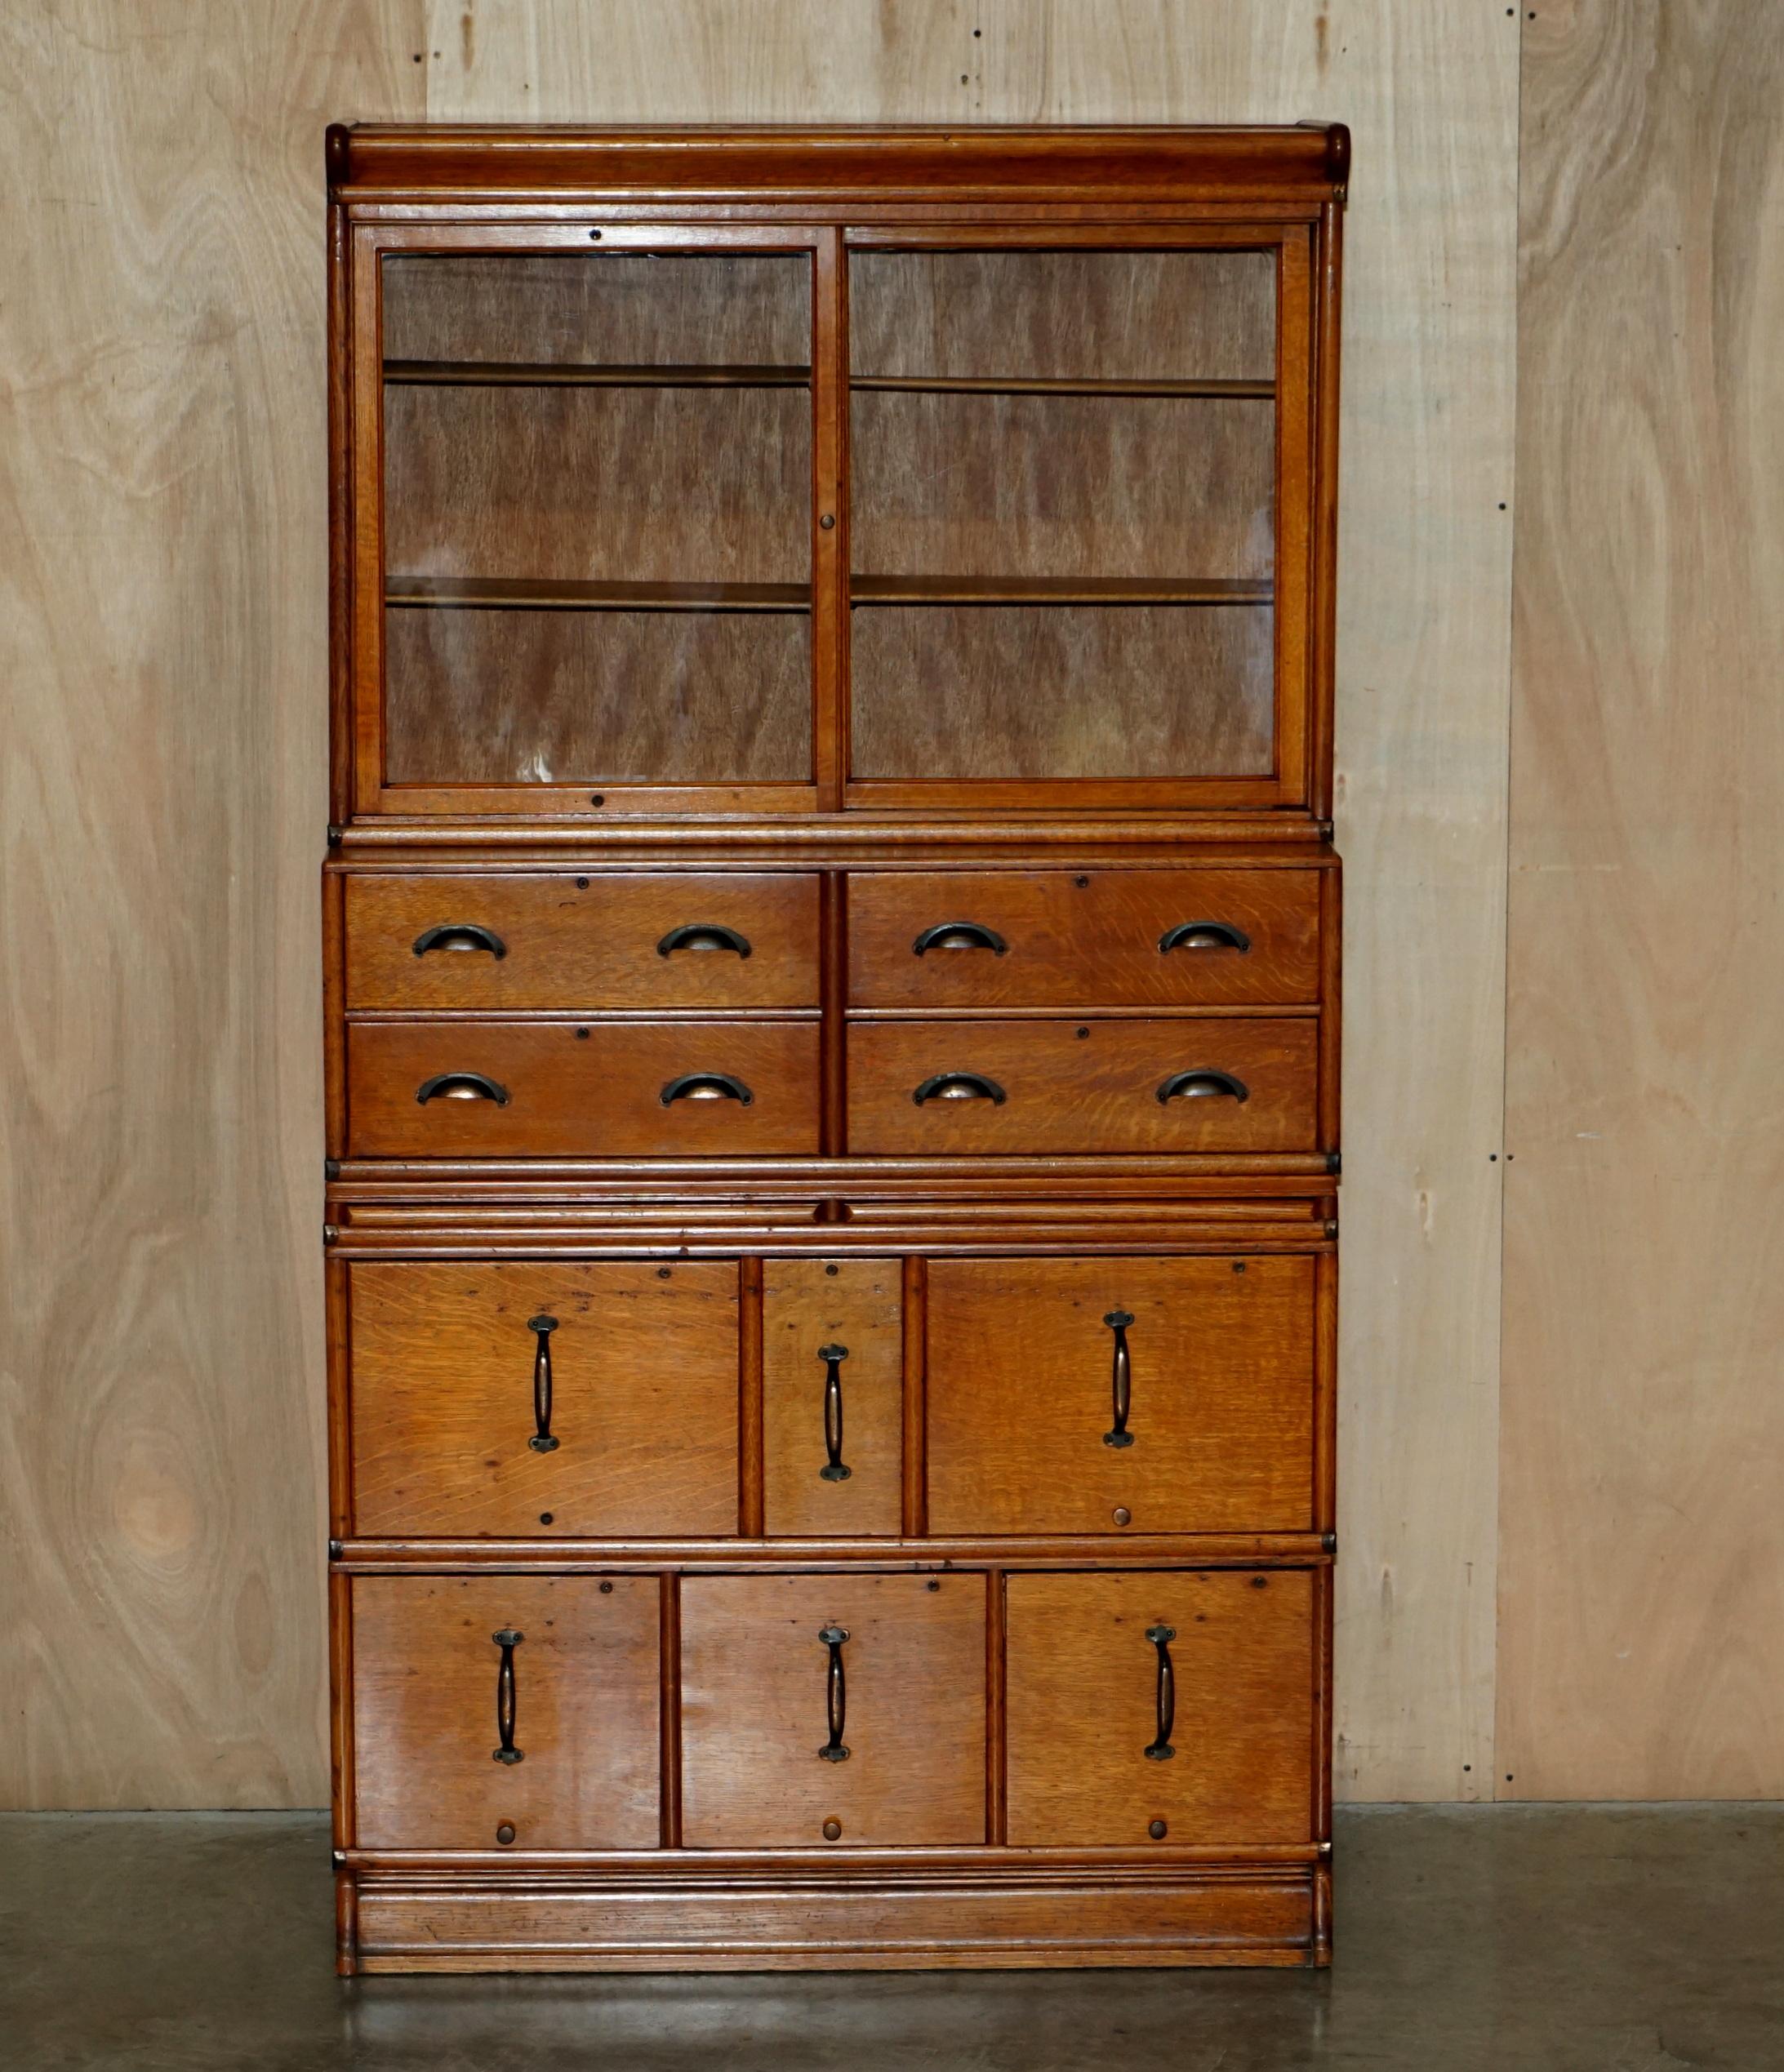 Royal House Antiques

Royal House Antiques is delighted to offer for sale this super rare, original Globe Wernicke, haberdashery shops filing bookcase cabinet 

Please note the delivery fee listed is just a guide, it covers within the M25 only for